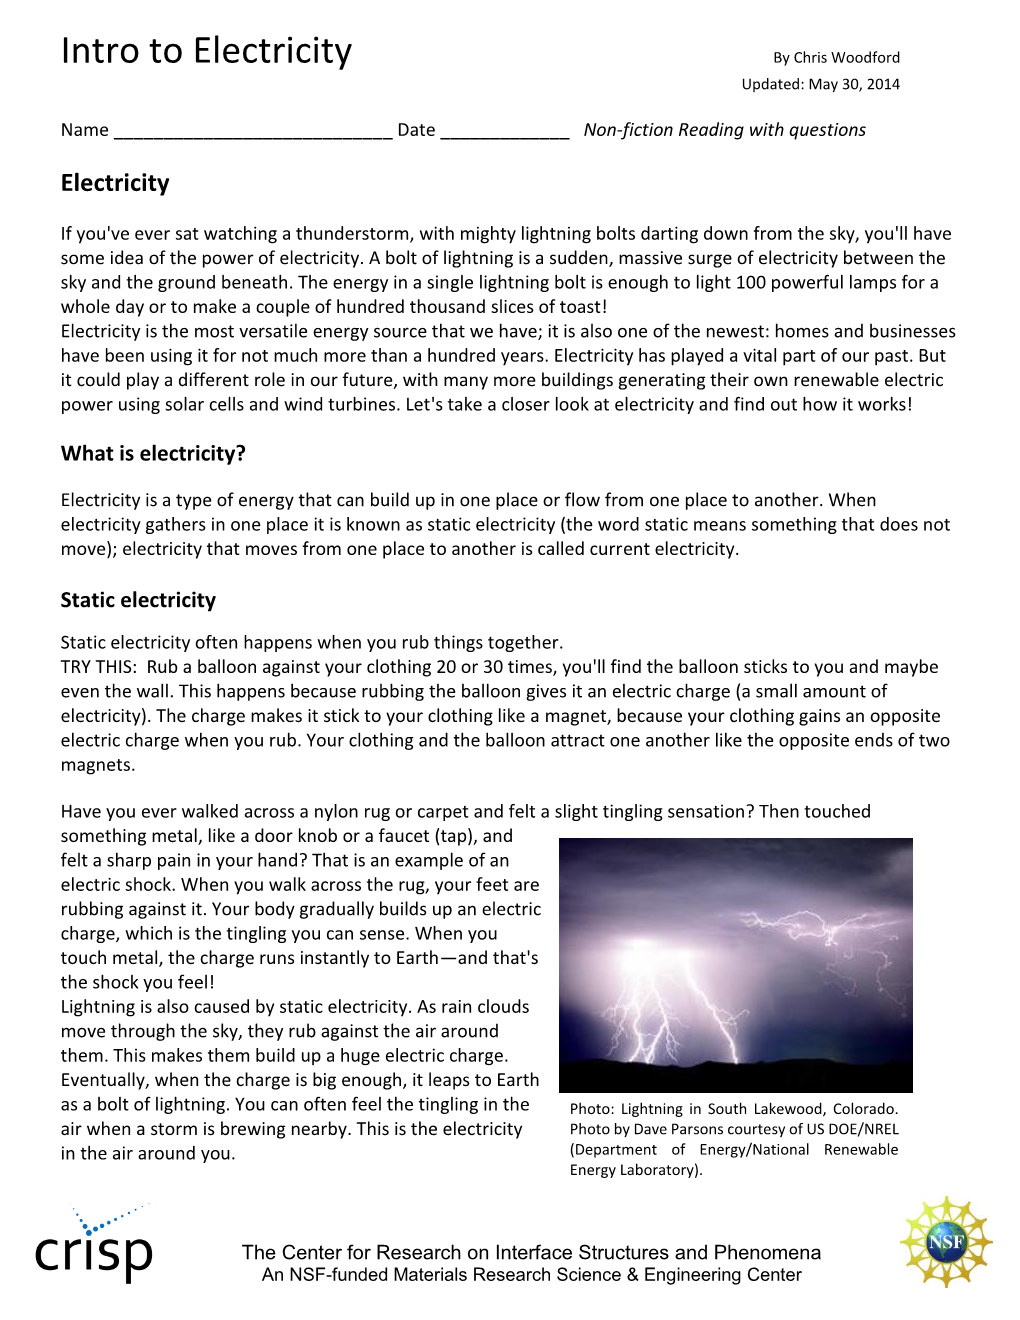 Intro to Electricity by Chris Woodford Updated: May 30, 2014